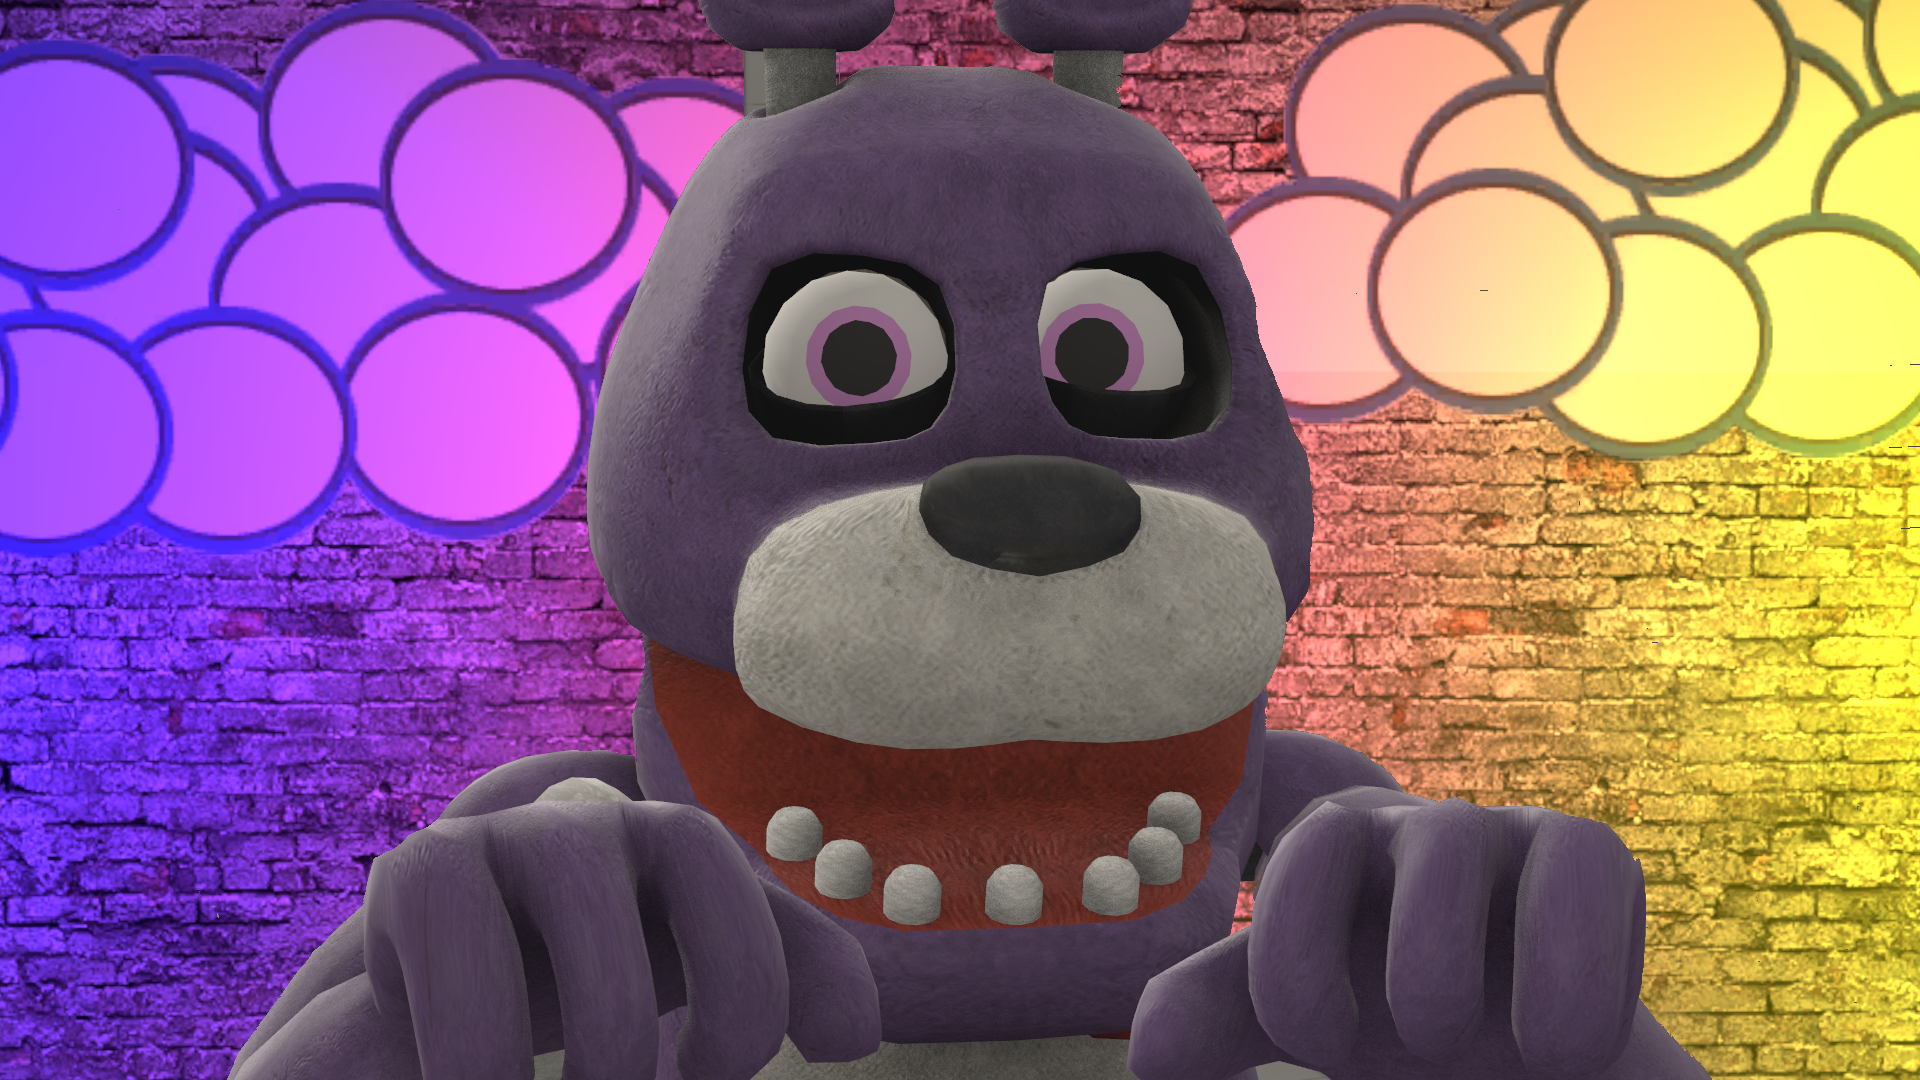 Free download SFM FNAF Wallpaper] The friendly Bonnie by ThatFiveNightsFan on [1920x1080] for your Desktop, Mobile & Tablet. Explore FNAF Wallpaper Bonnie. FNAF Nightmare Wallpaper, FNAF Free Wallpaper, Cute Fnaf Wallpaper